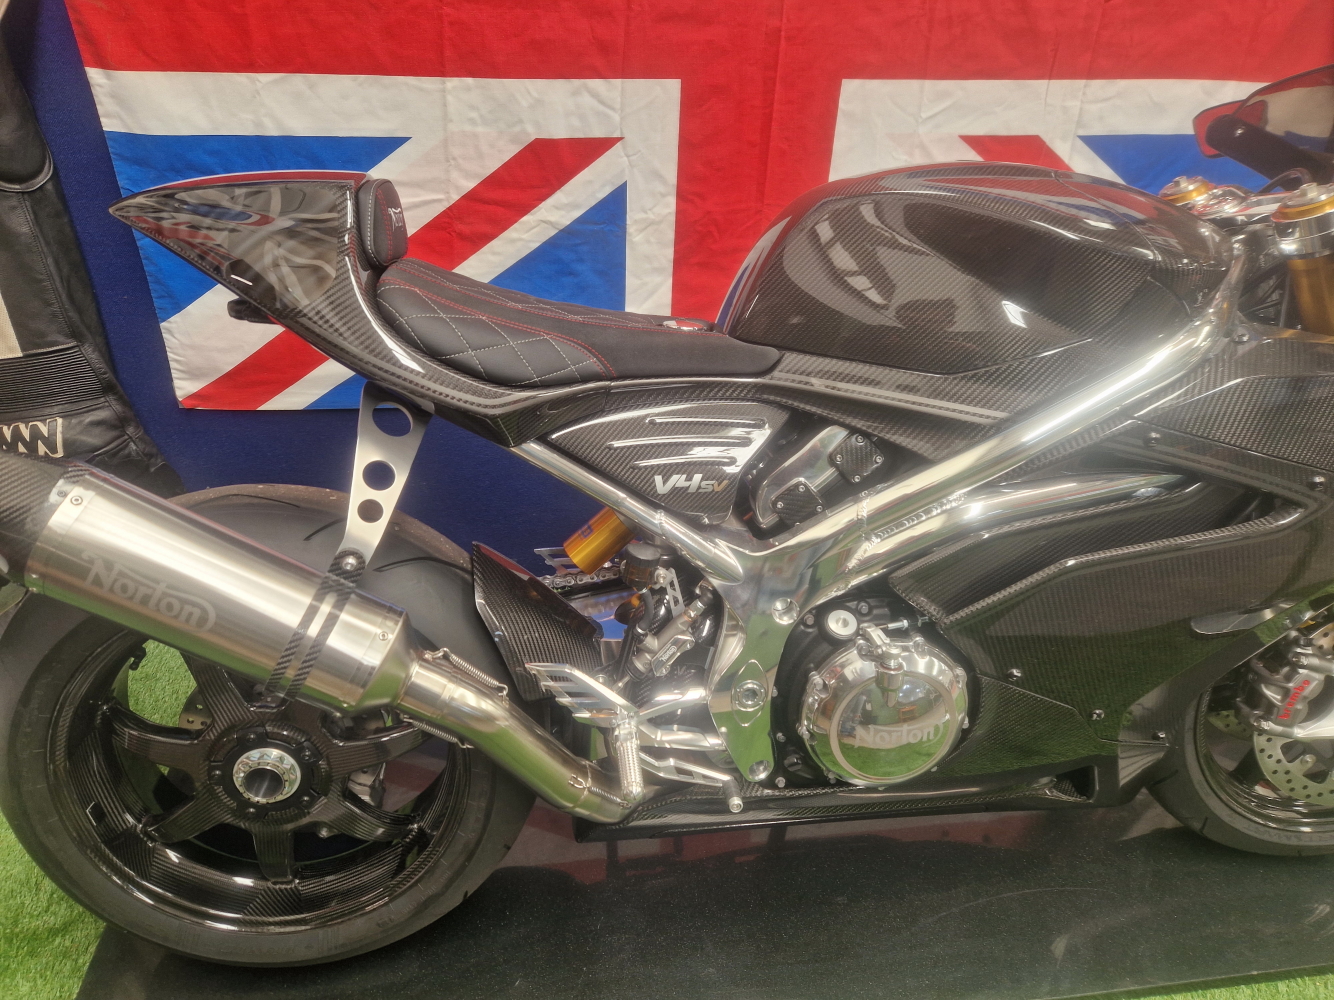 NORTON V4 SV.. NEW AND UN-RIDDEN, ORDERED IN 2017 DELIVERED 2024. A STUNNING UNUSED EXAMPLE OF - Image 5 of 9